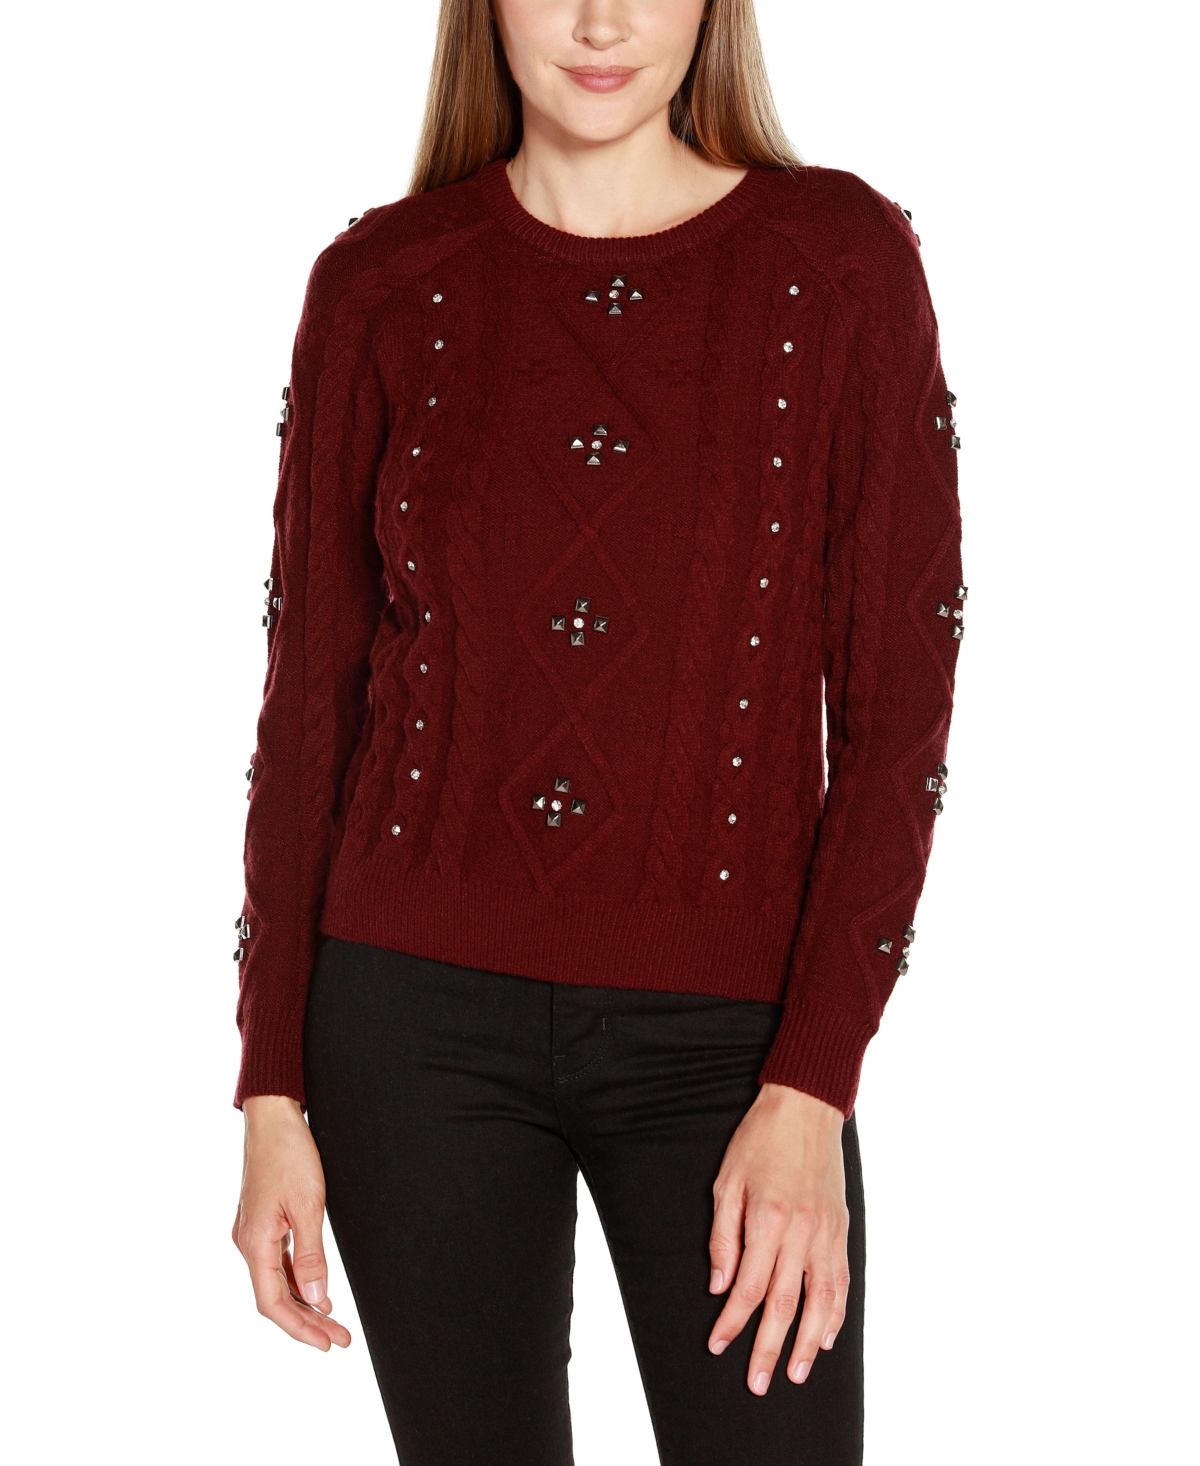 Belldini Black Label Plus Size Embellished Cable Knit Sweater In Black Cherry